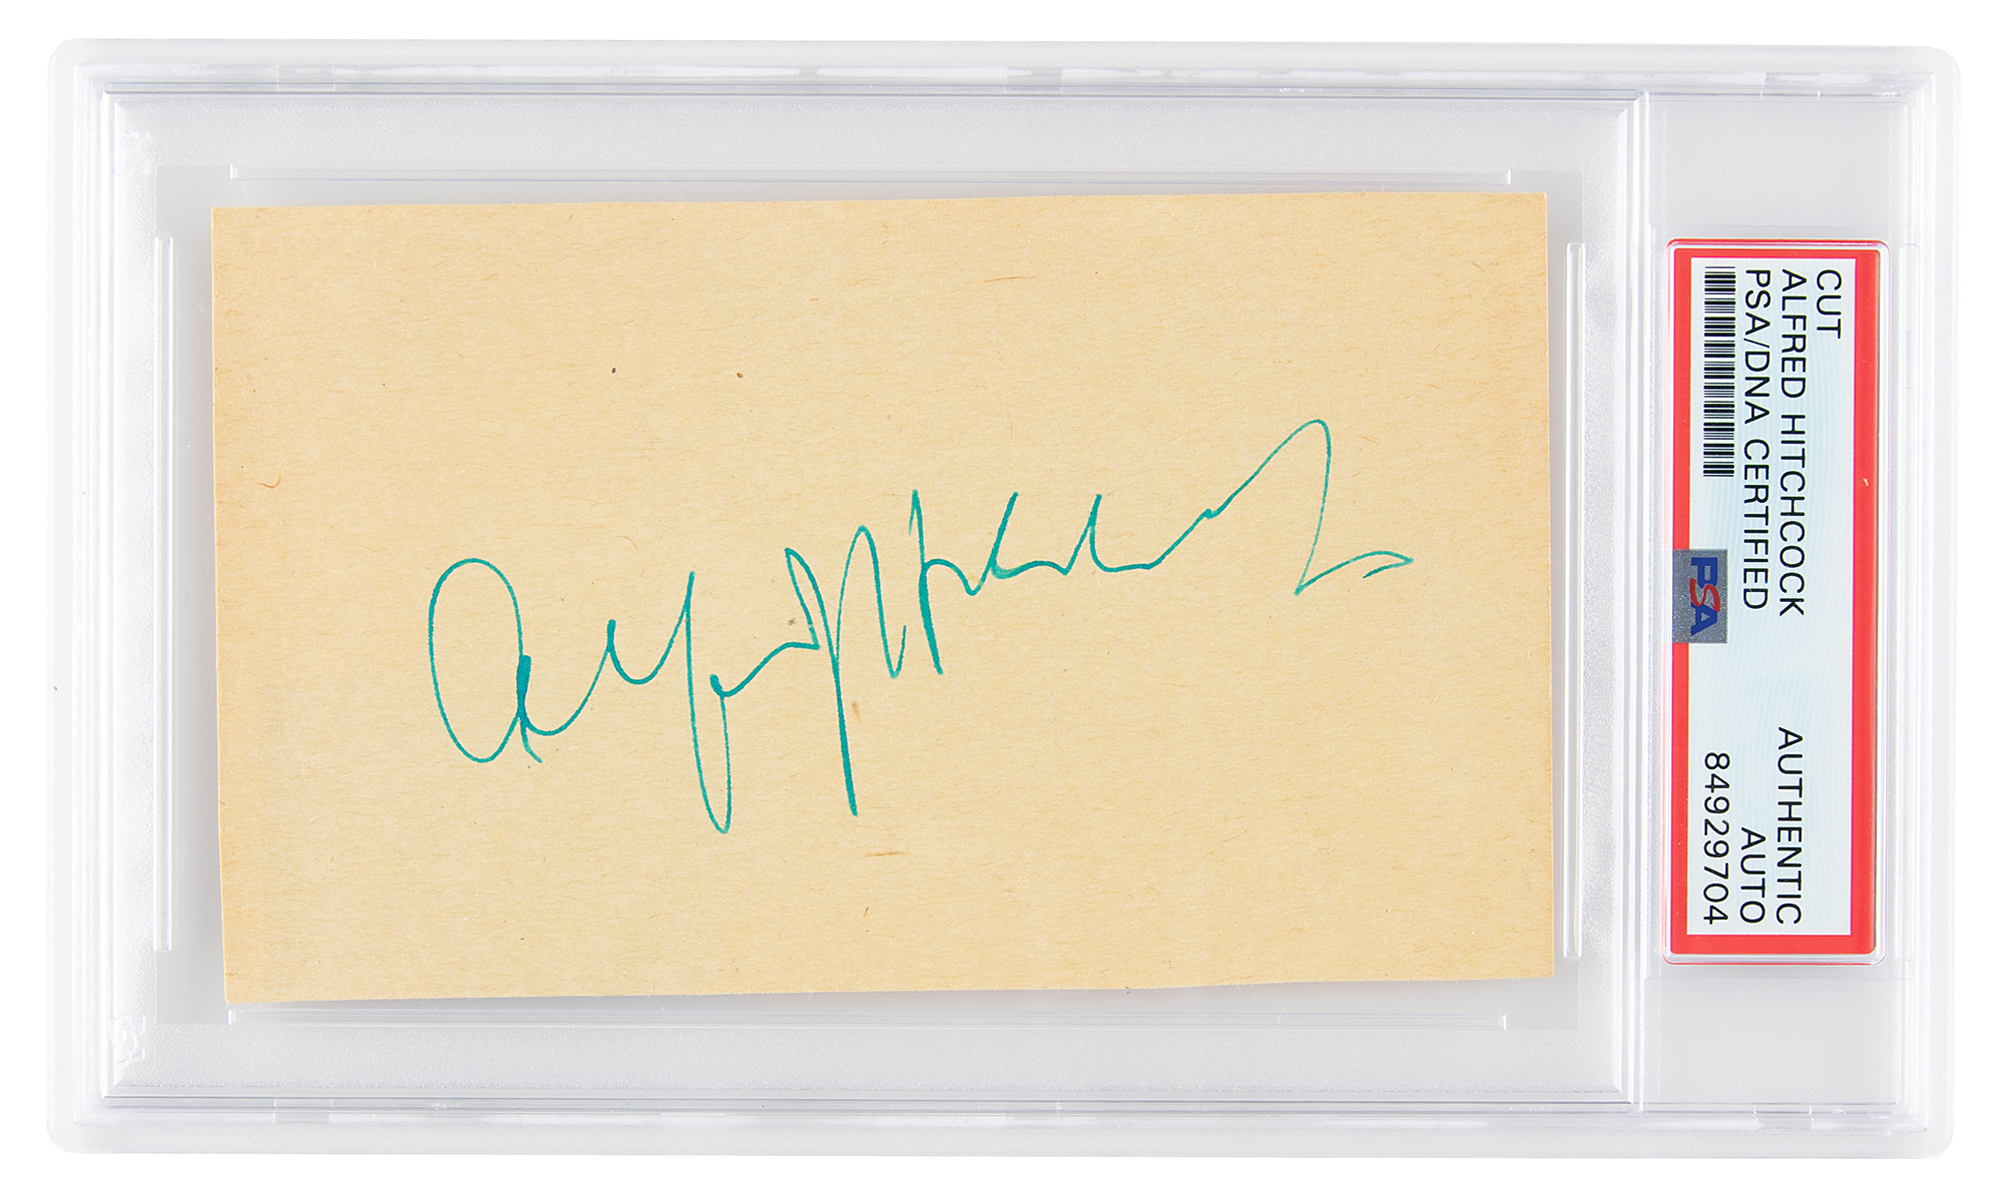 Alfred Hitchcock Signature | RR Auction